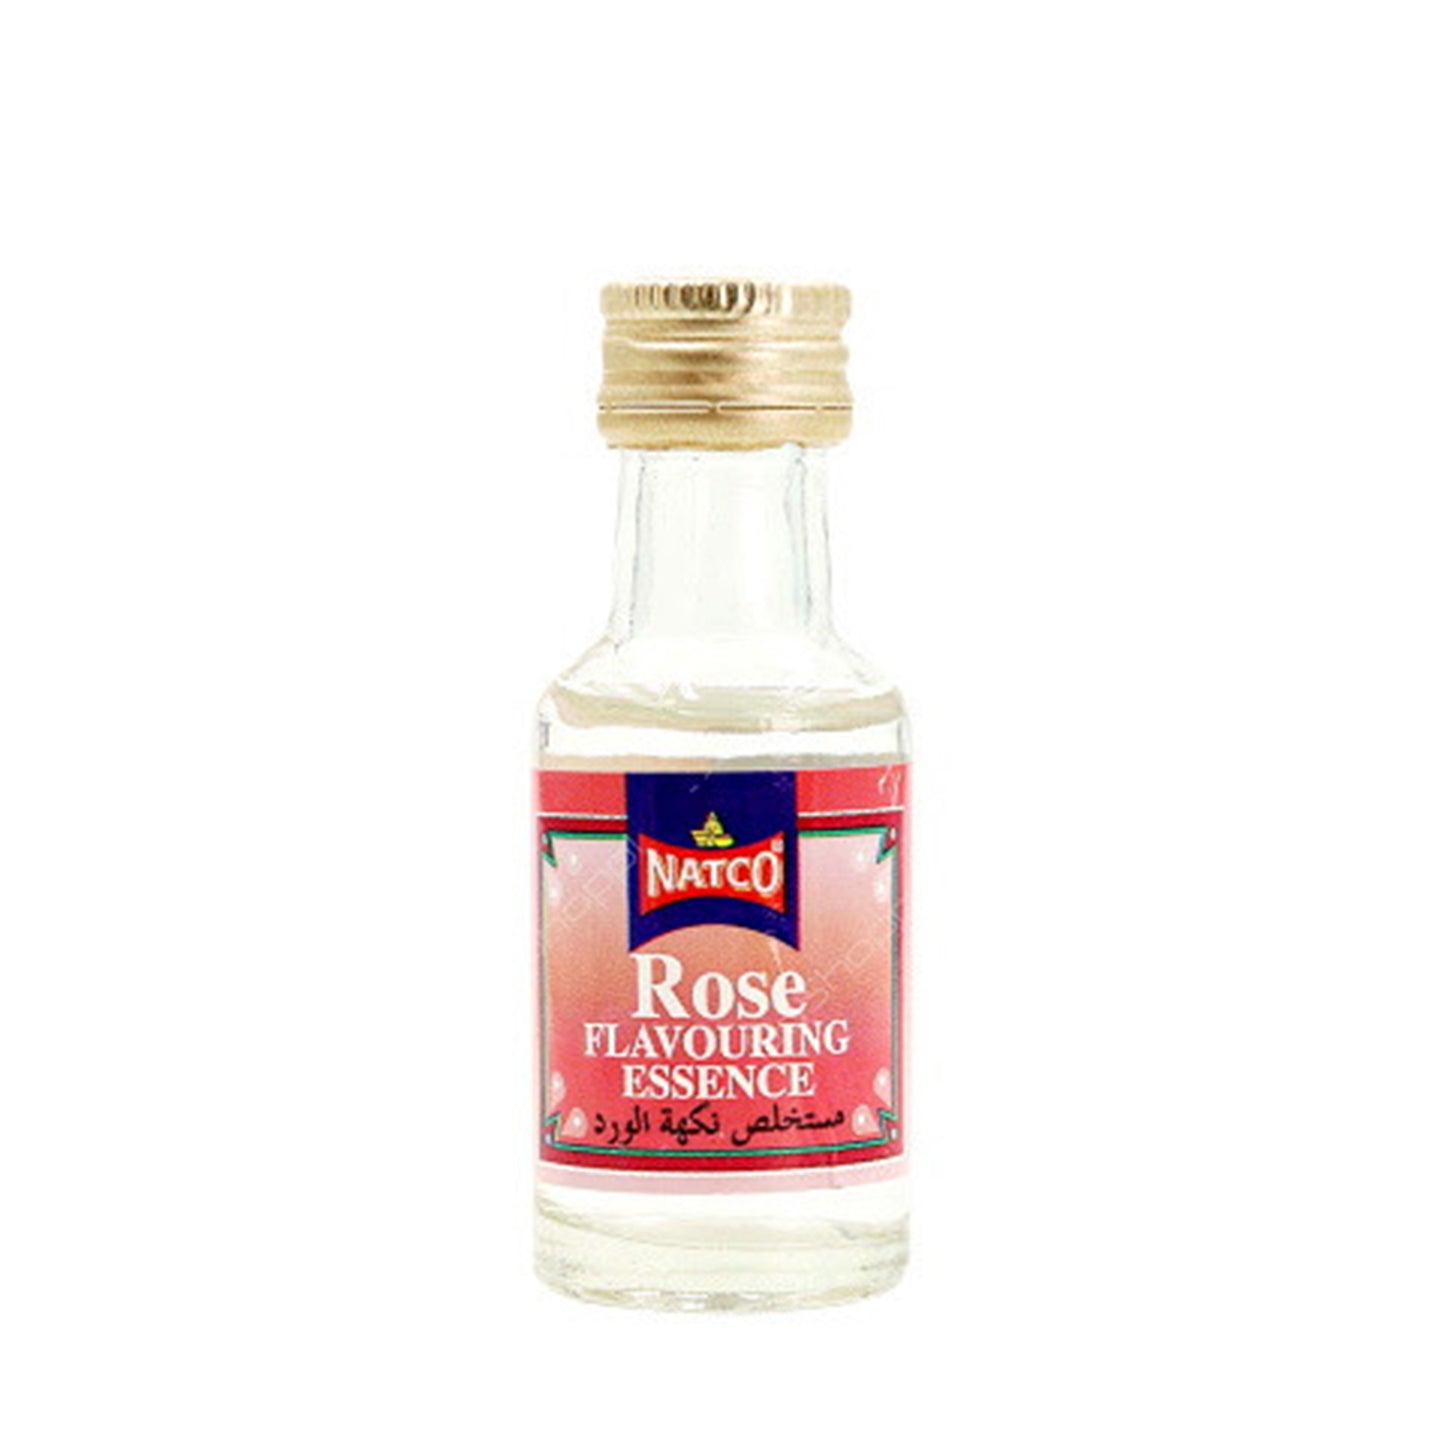 Natco Rose Flavouring Essence 28ml